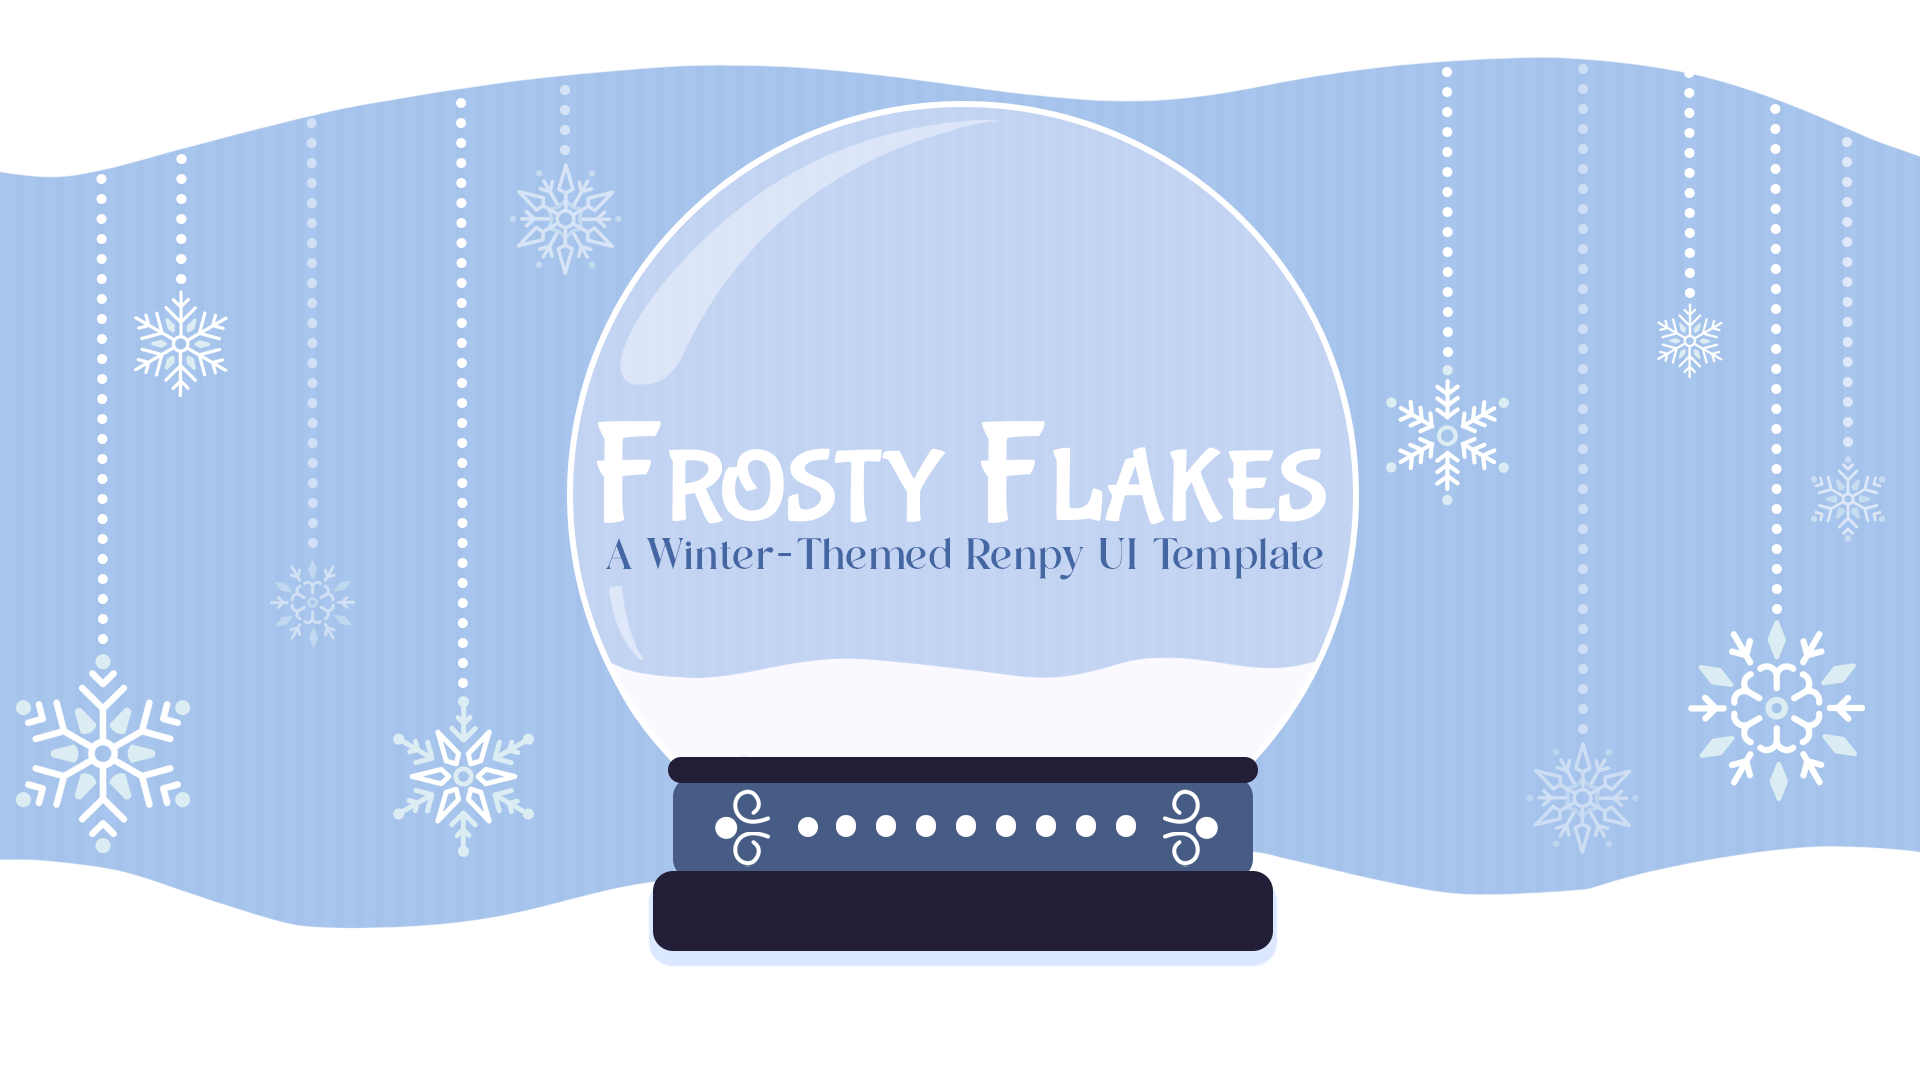 Frosty Flakes: Renpy Winter Themed UI Template